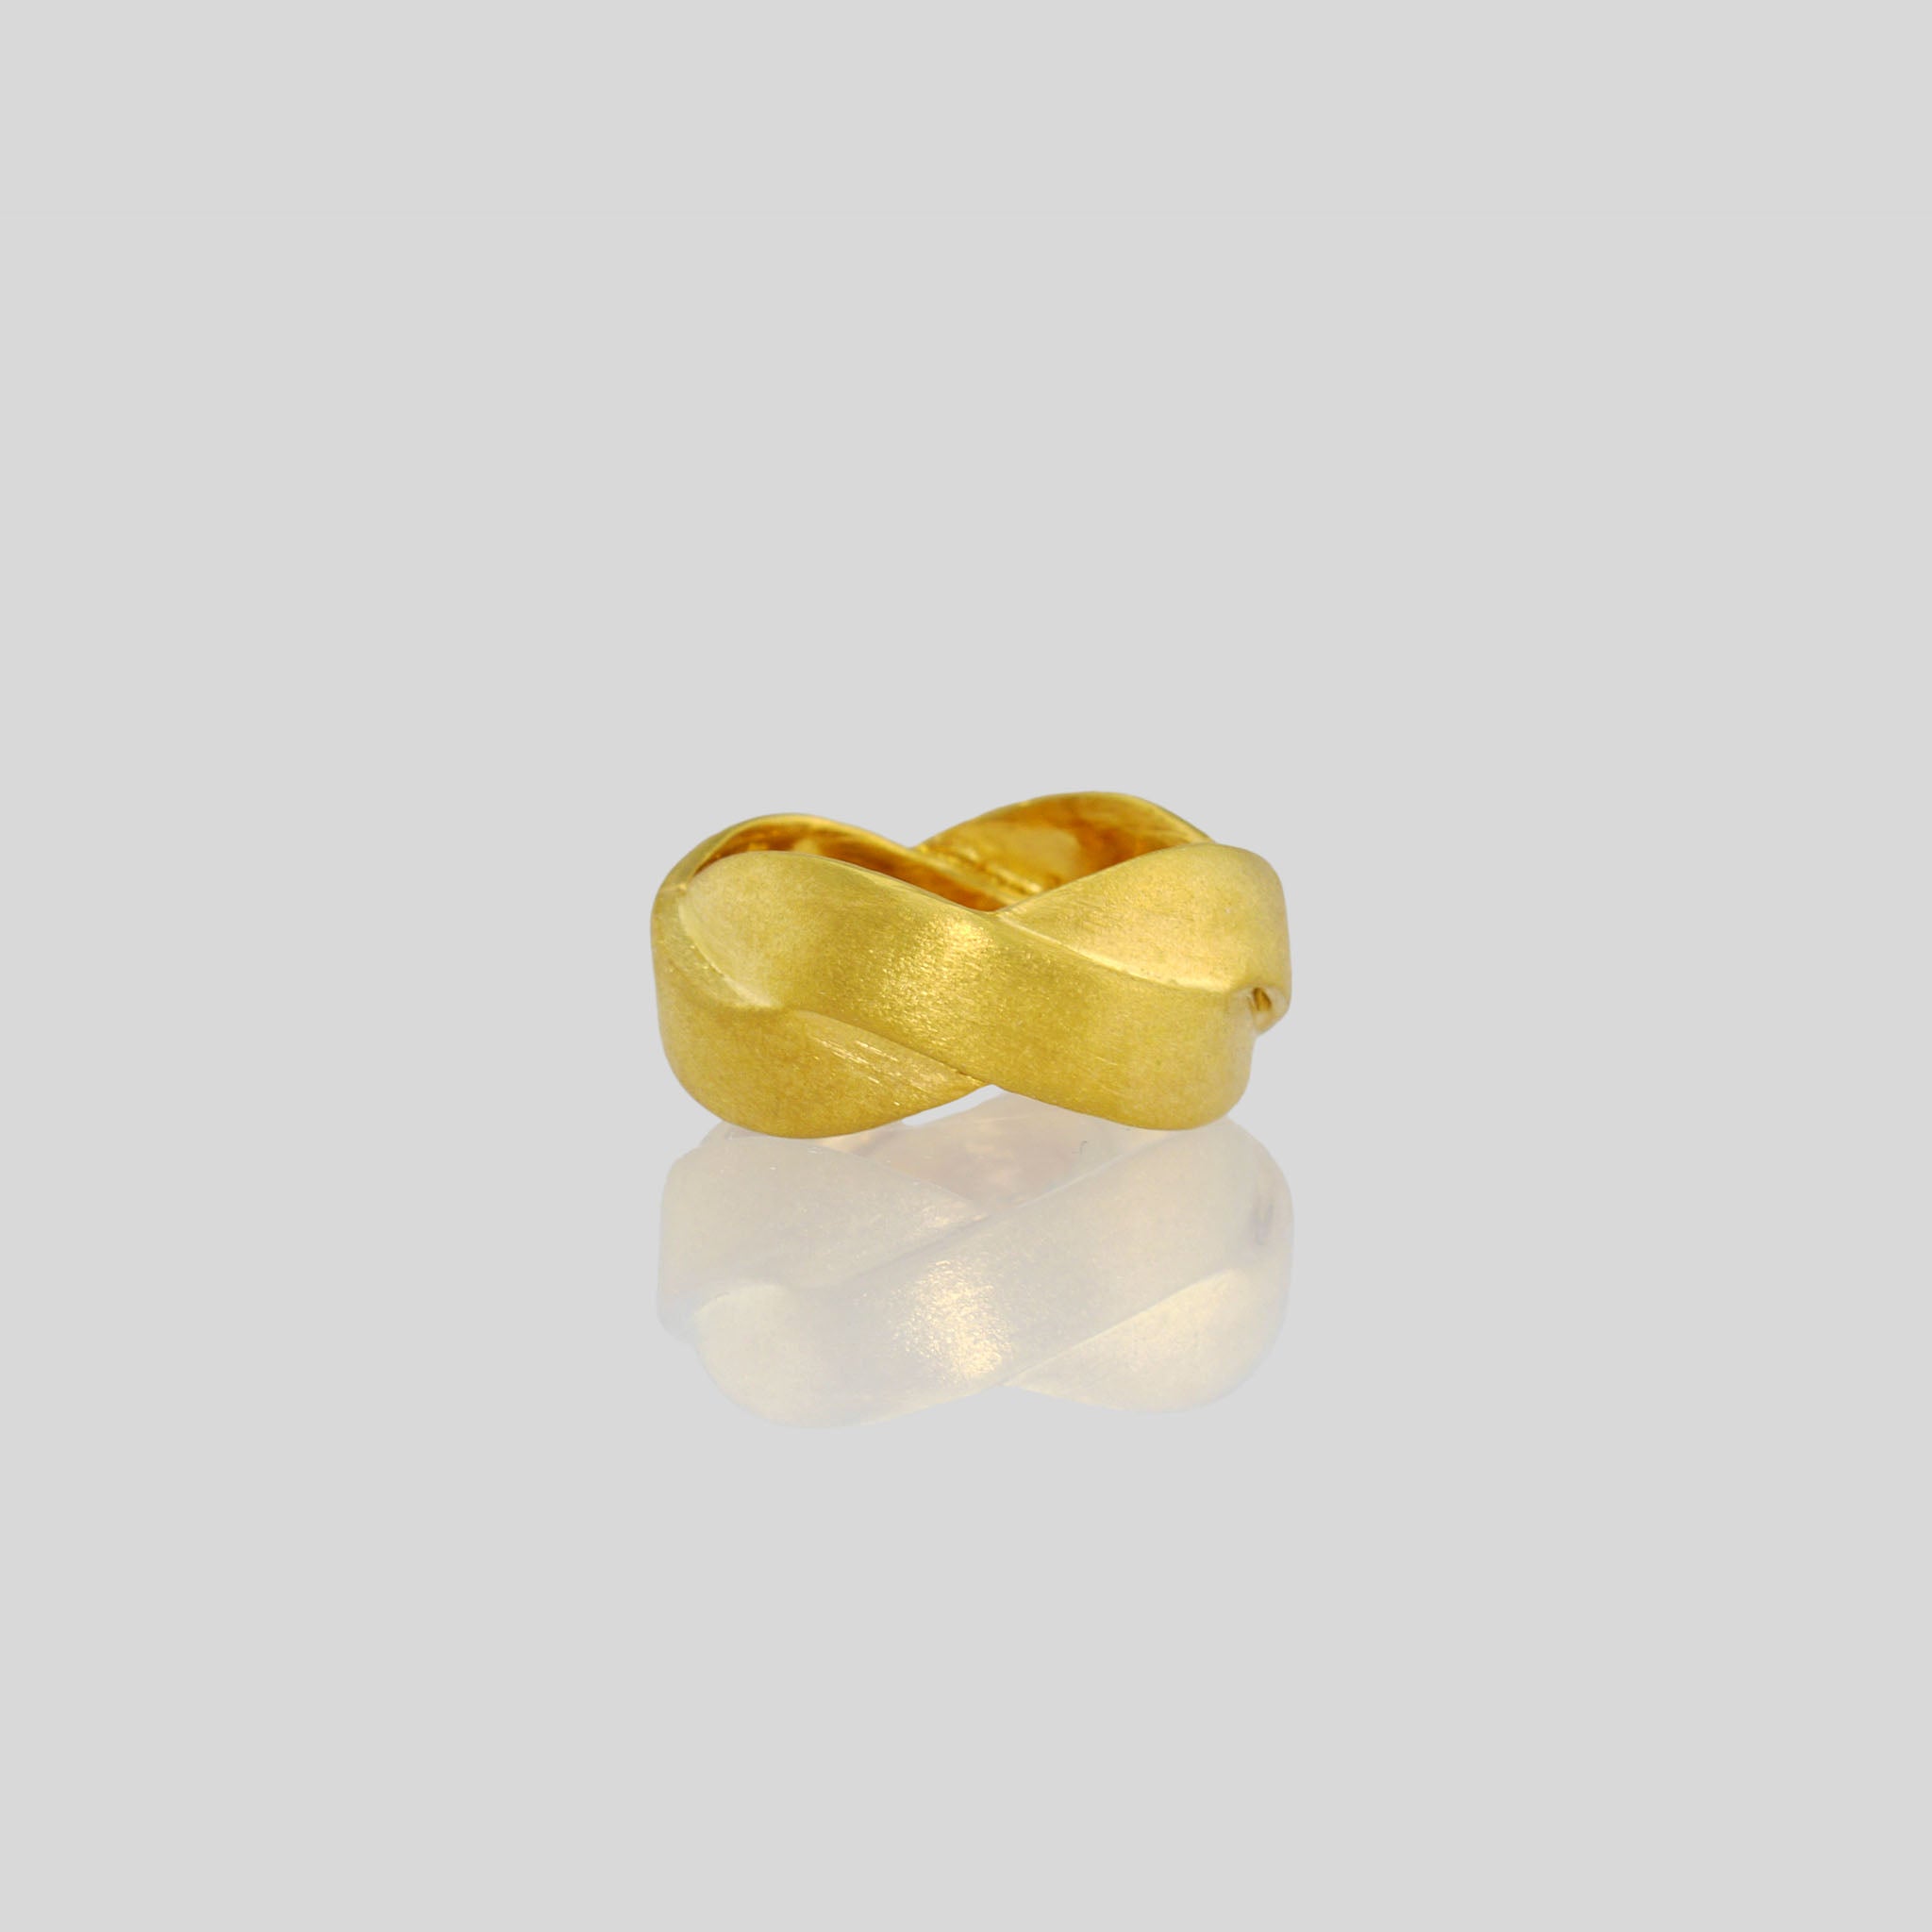 Handmade 18k Gold ring with braided bands, offering an elegant and versatile addition to both everyday wear and special occasions. A timeless classic with a unique twist.